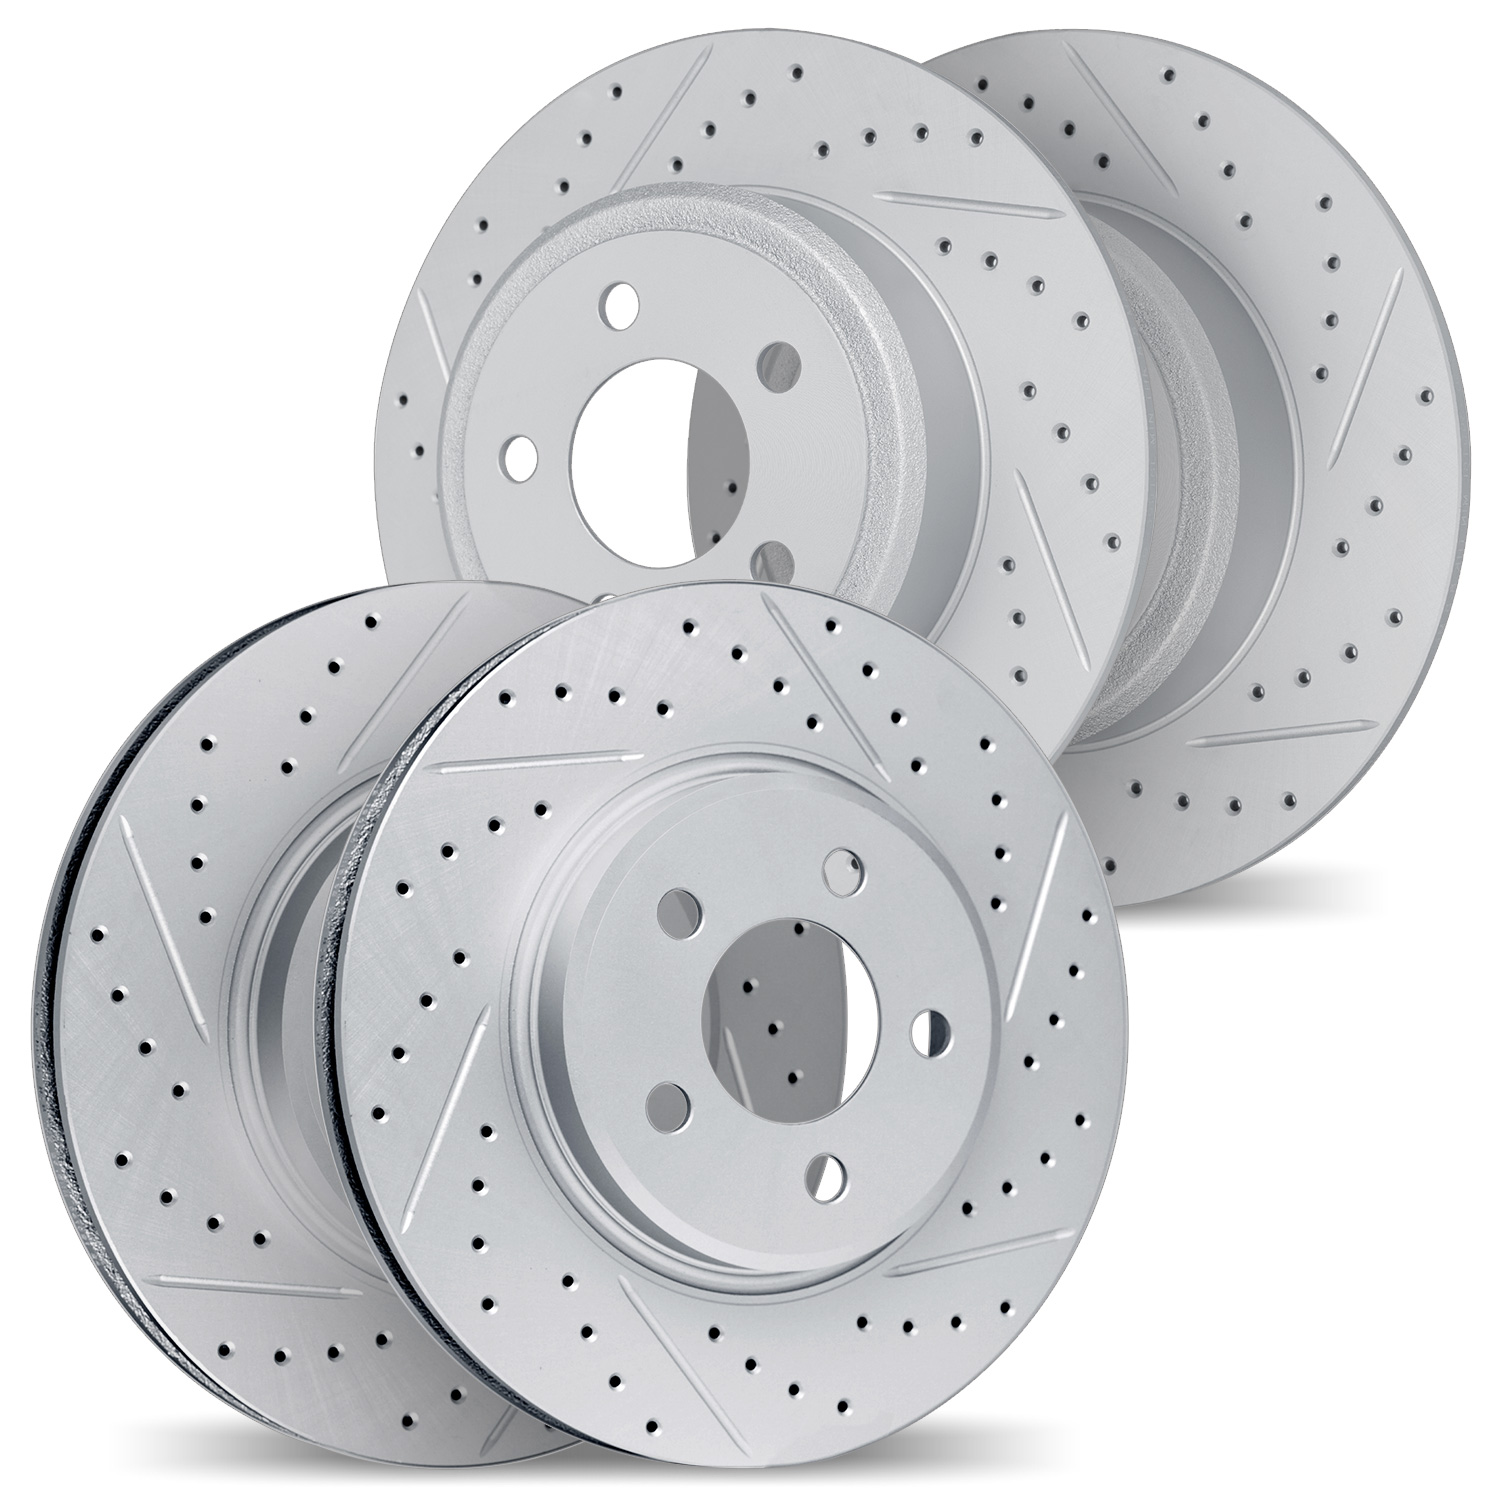 2004-42012 Geoperformance Drilled/Slotted Brake Rotors, 2005-2010 Mopar, Position: Front and Rear